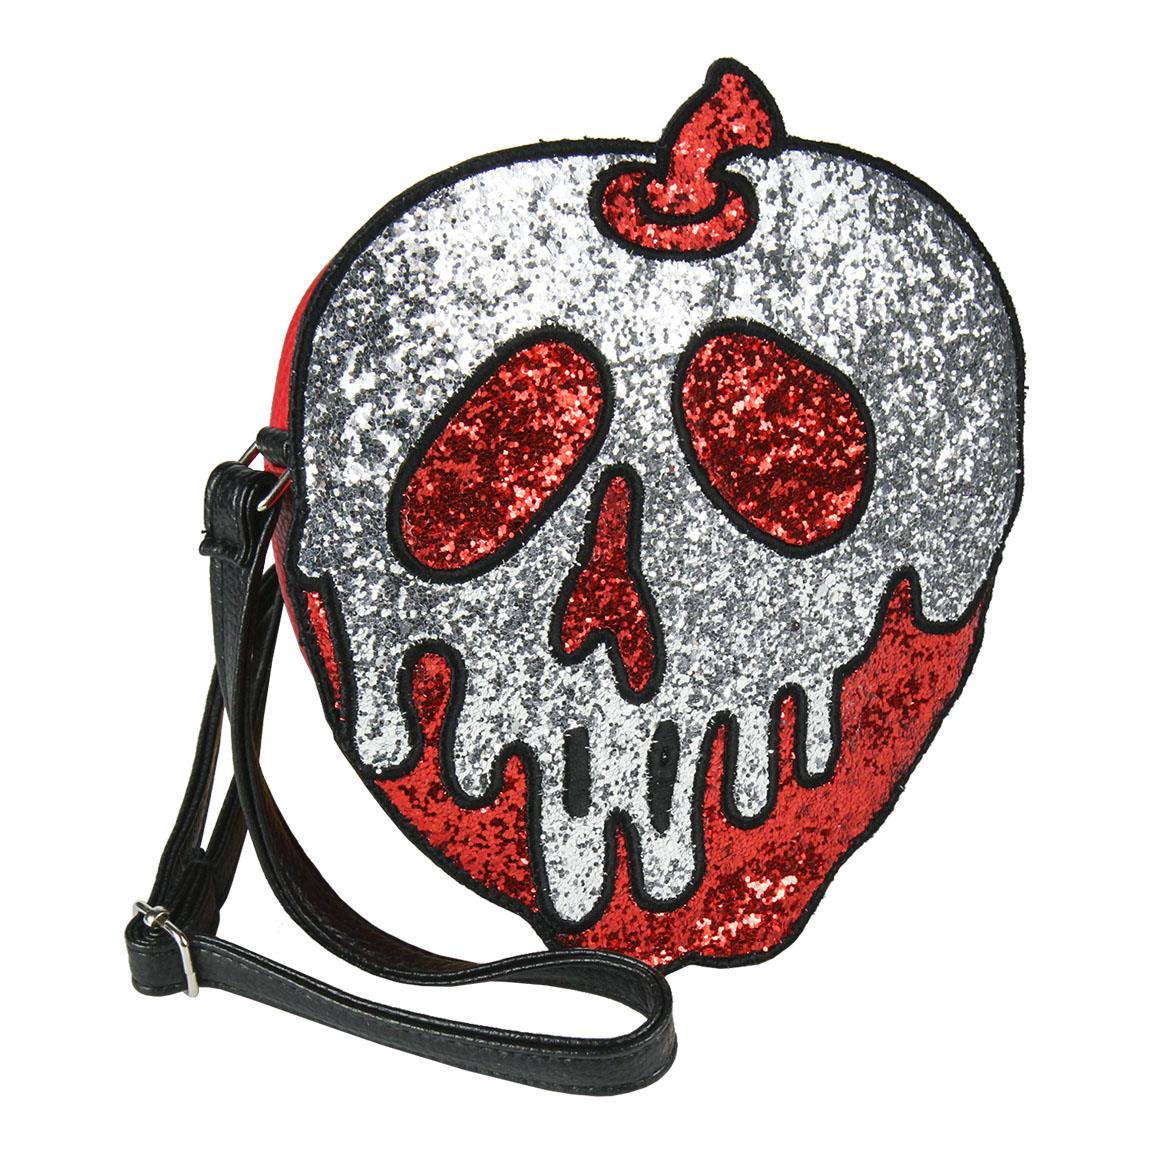 Loungefly Snow White Poison Apple Coin Purse | eBay